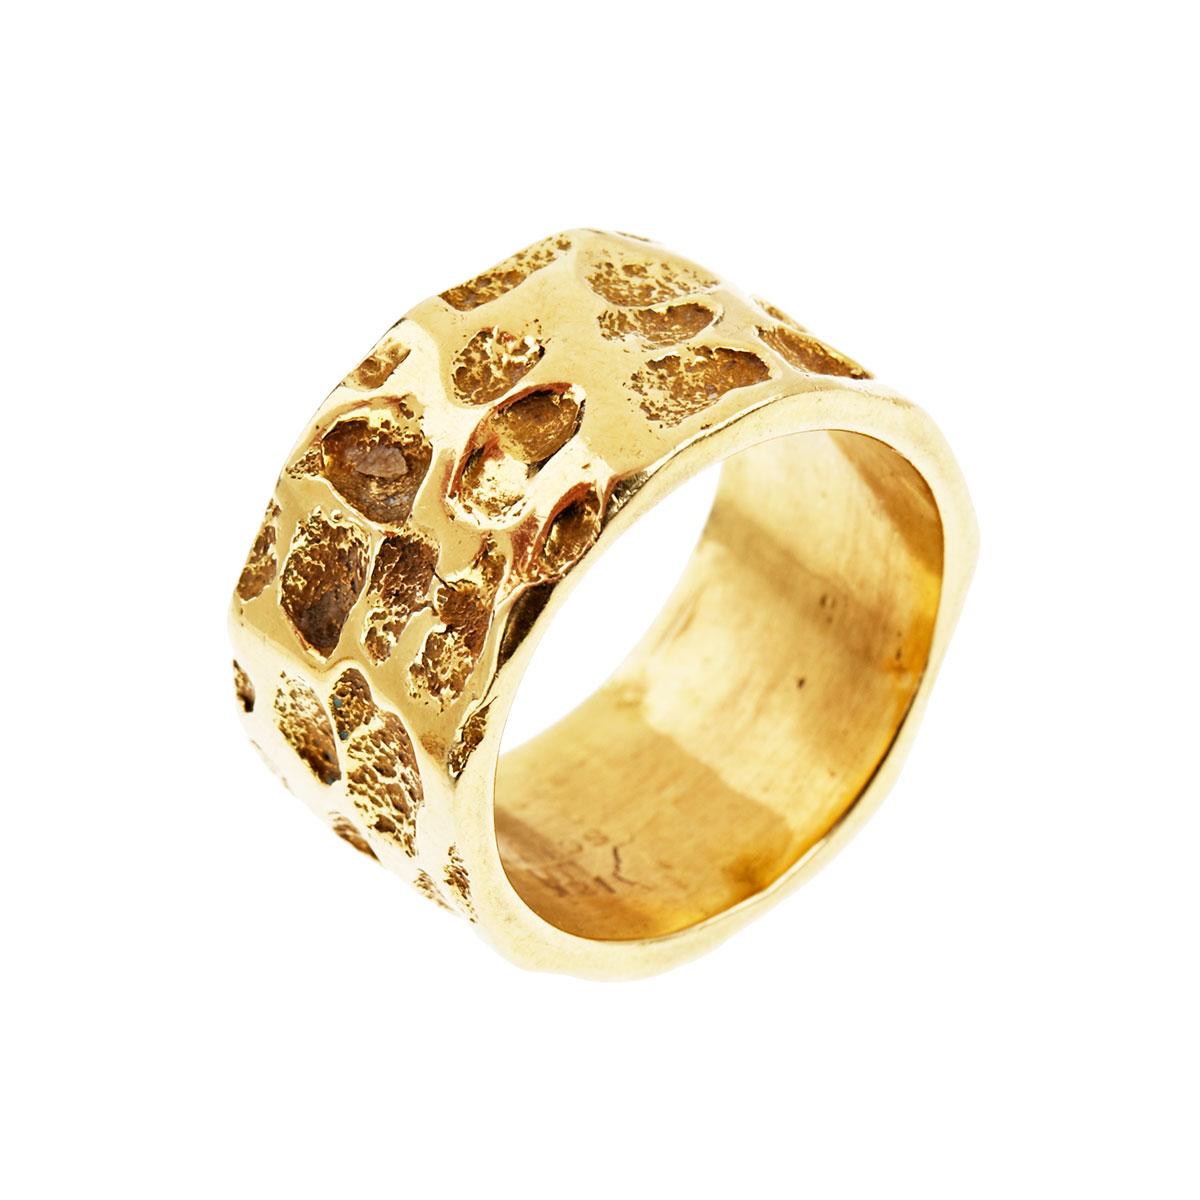 Walter Schluep Canadian 18k Yellow Gold Sculpted Band